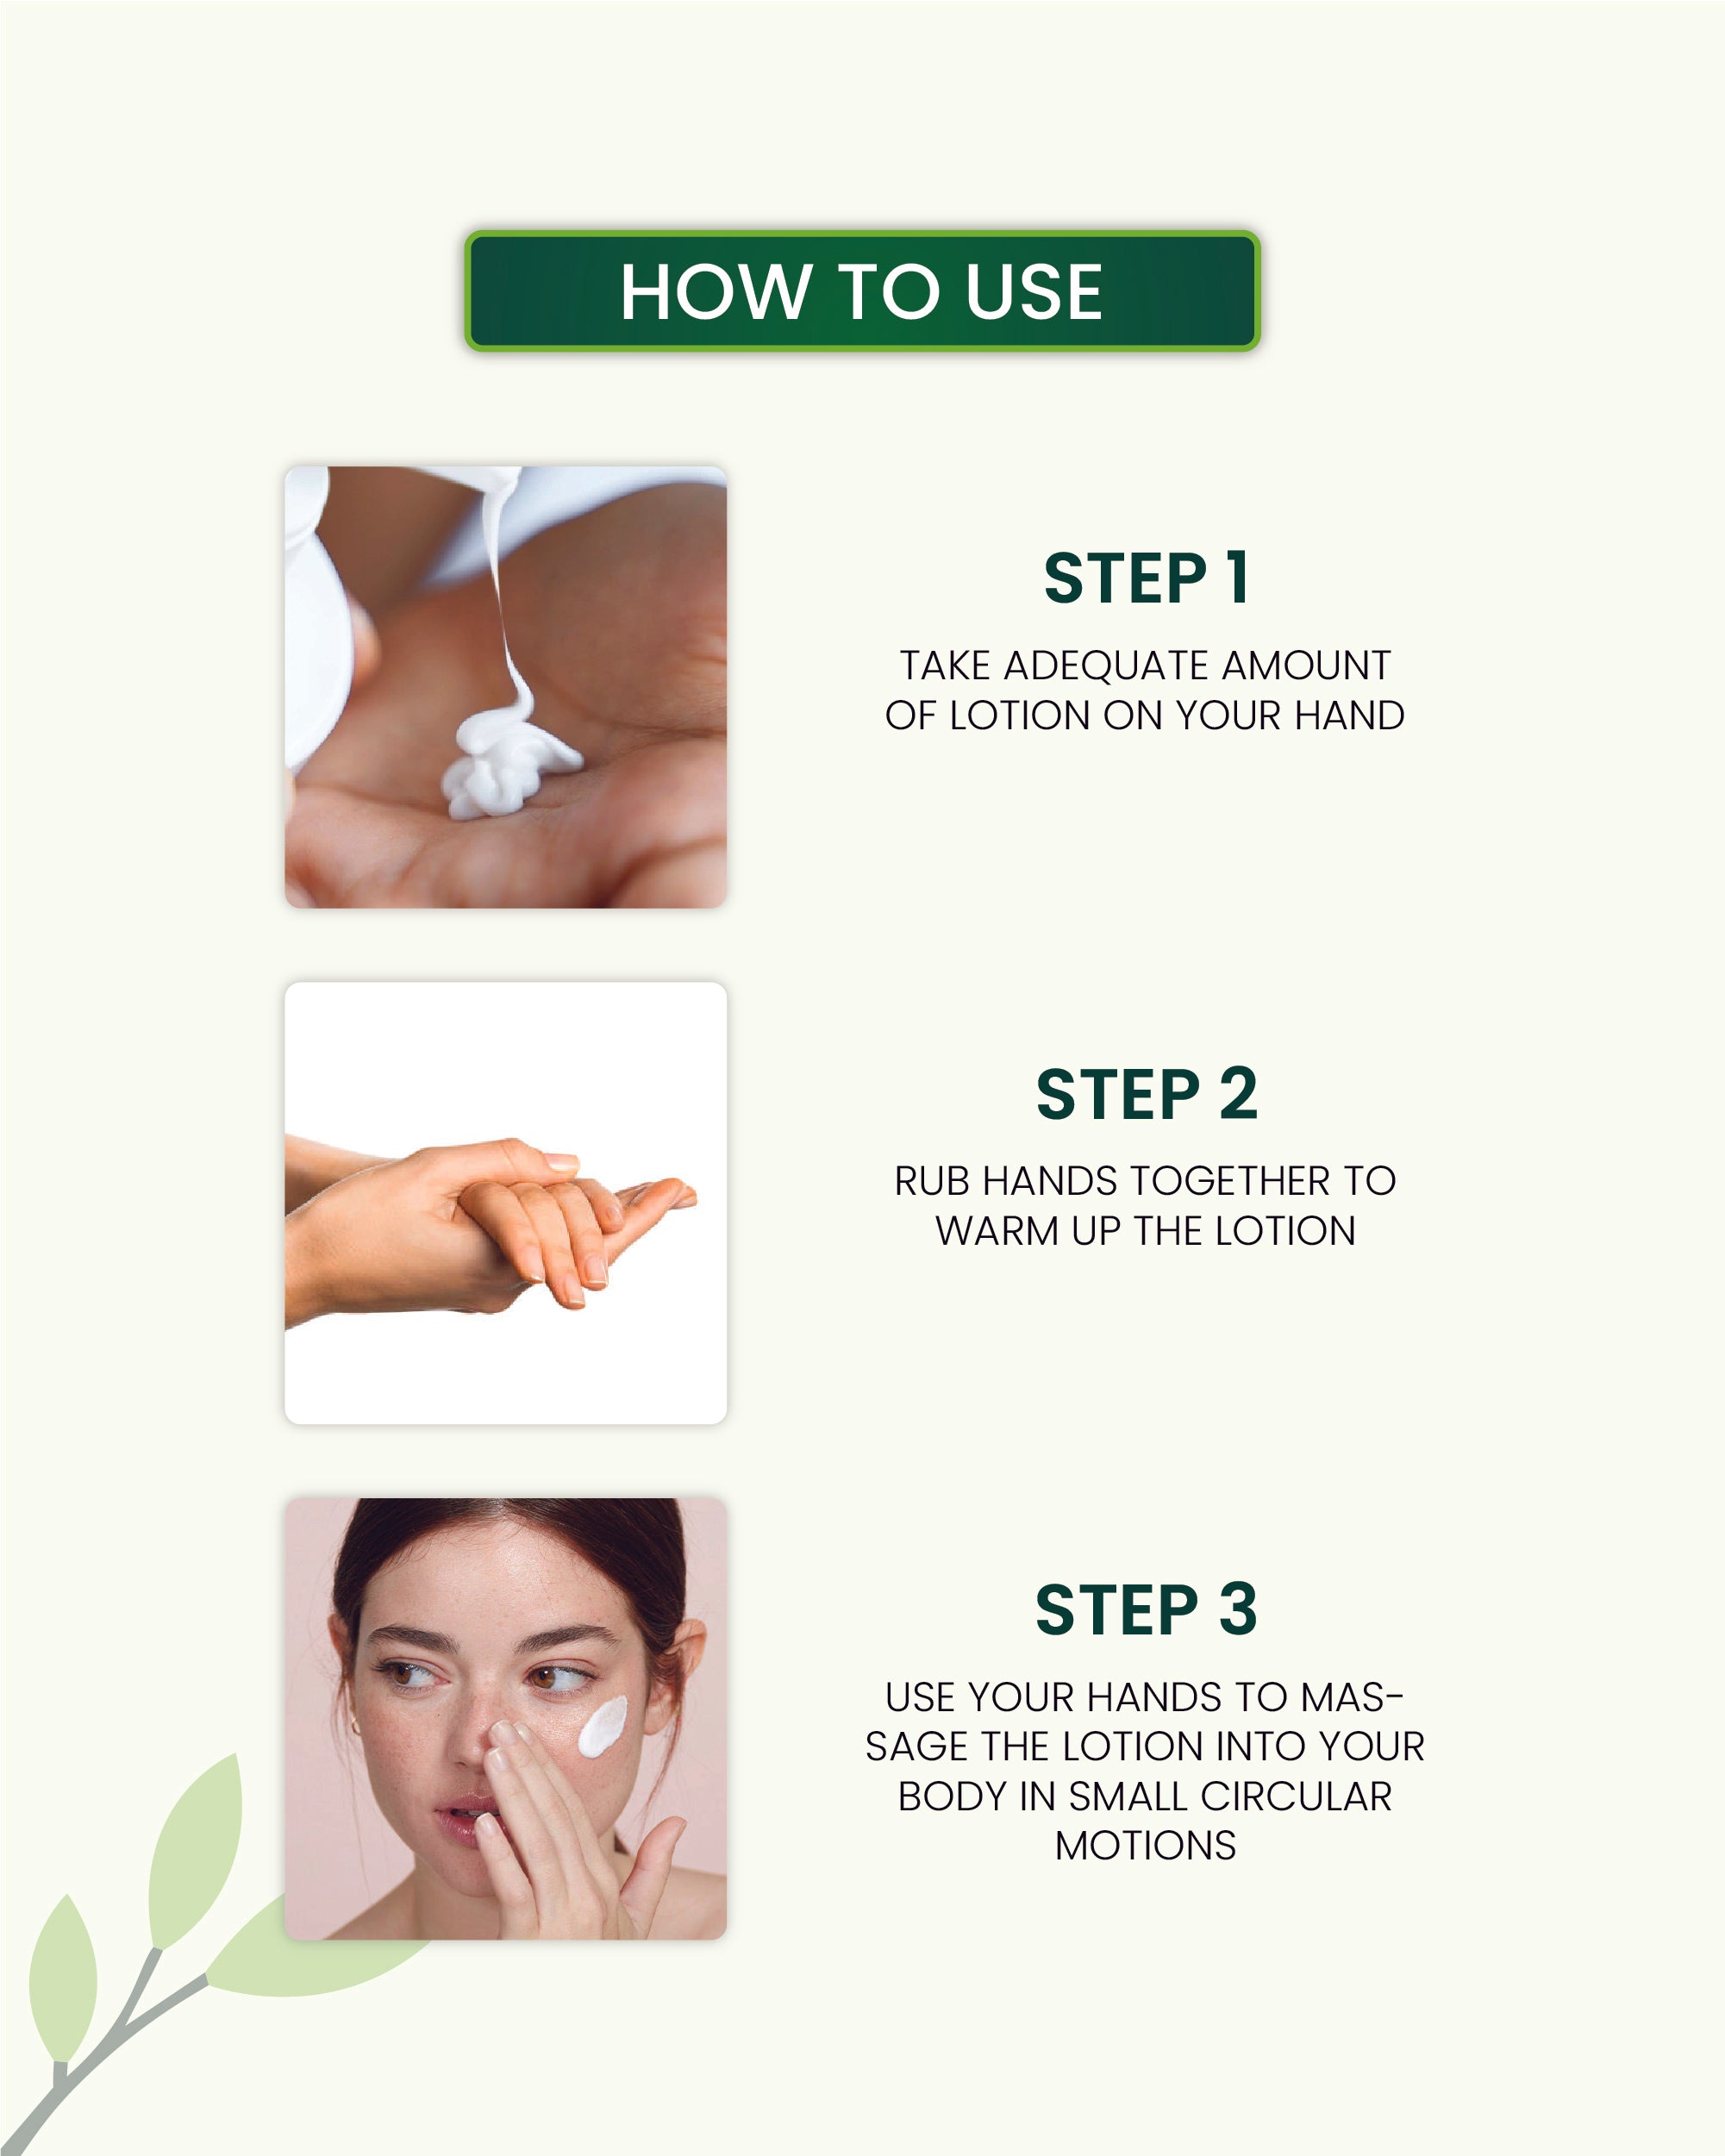 How to Use 3 in 1 Daily Suncreen Lotion